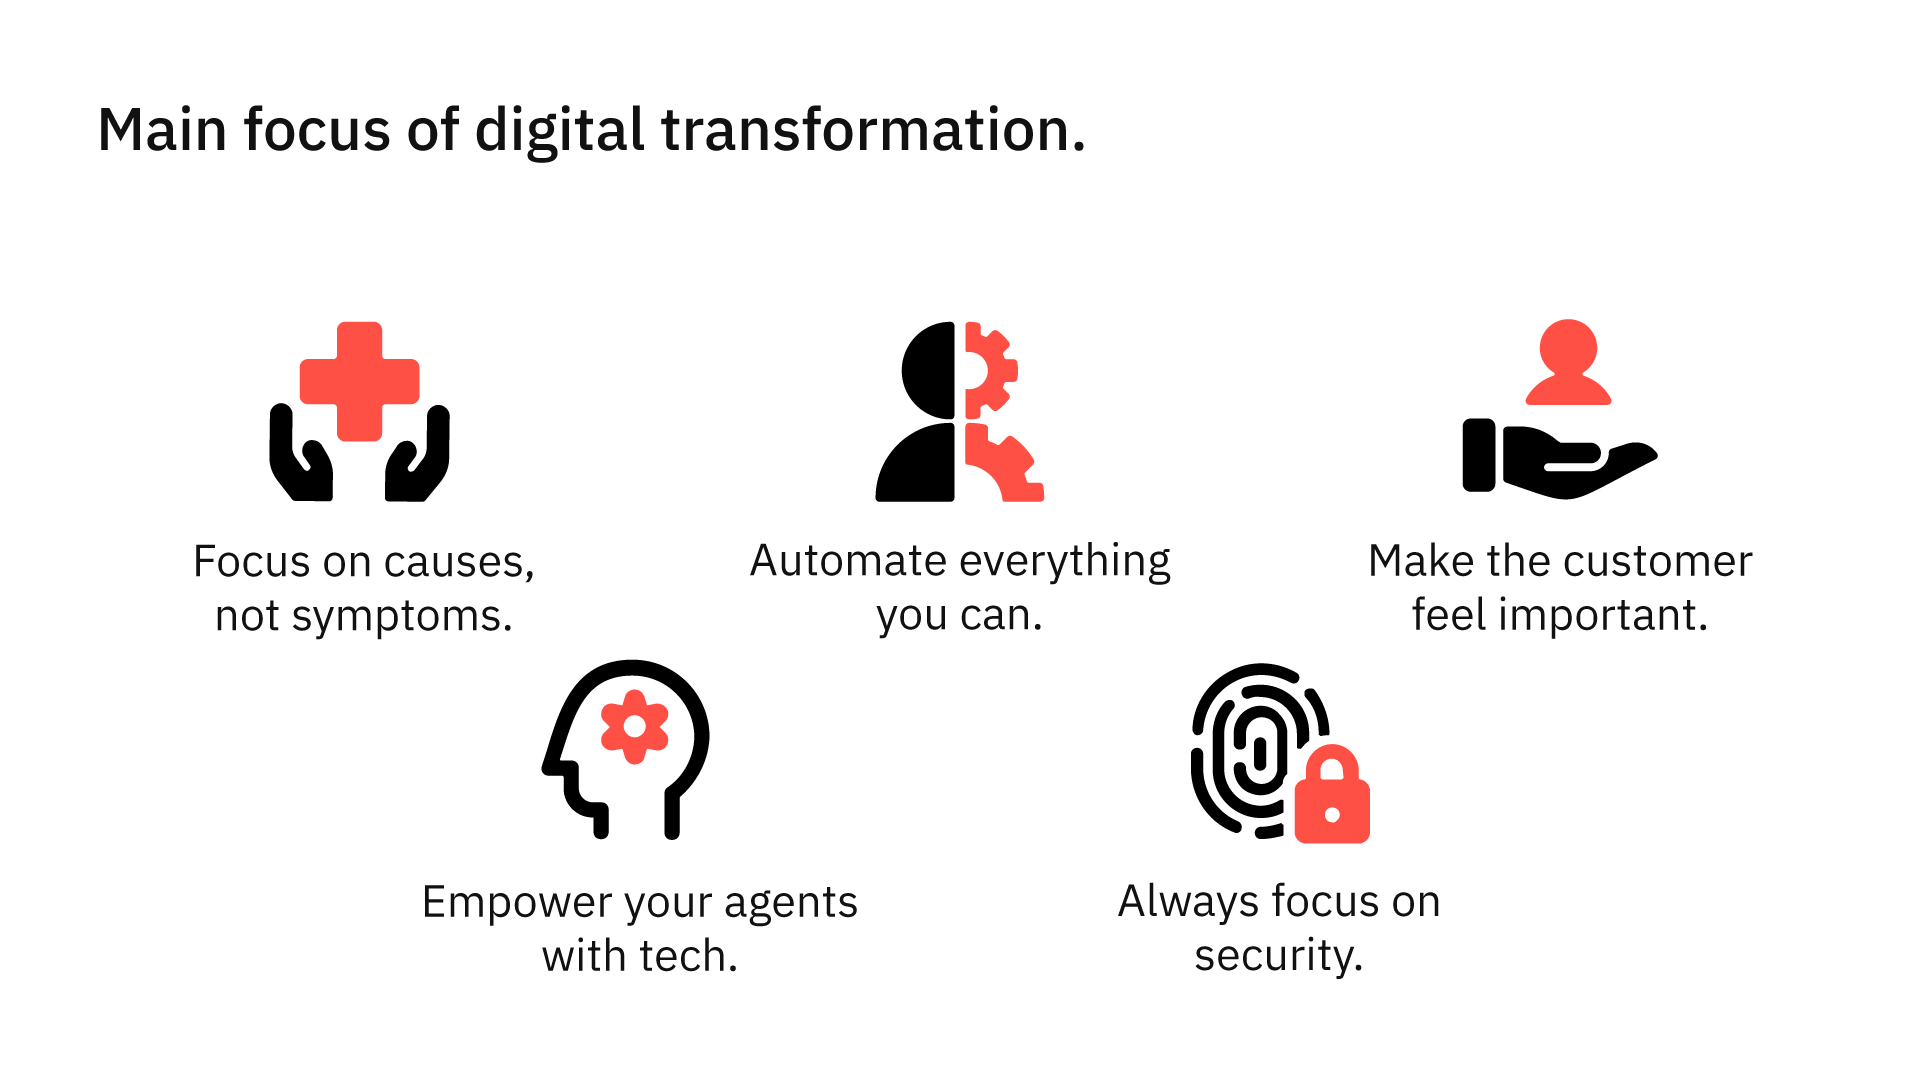 Focus areas of digital transformation in customer experience